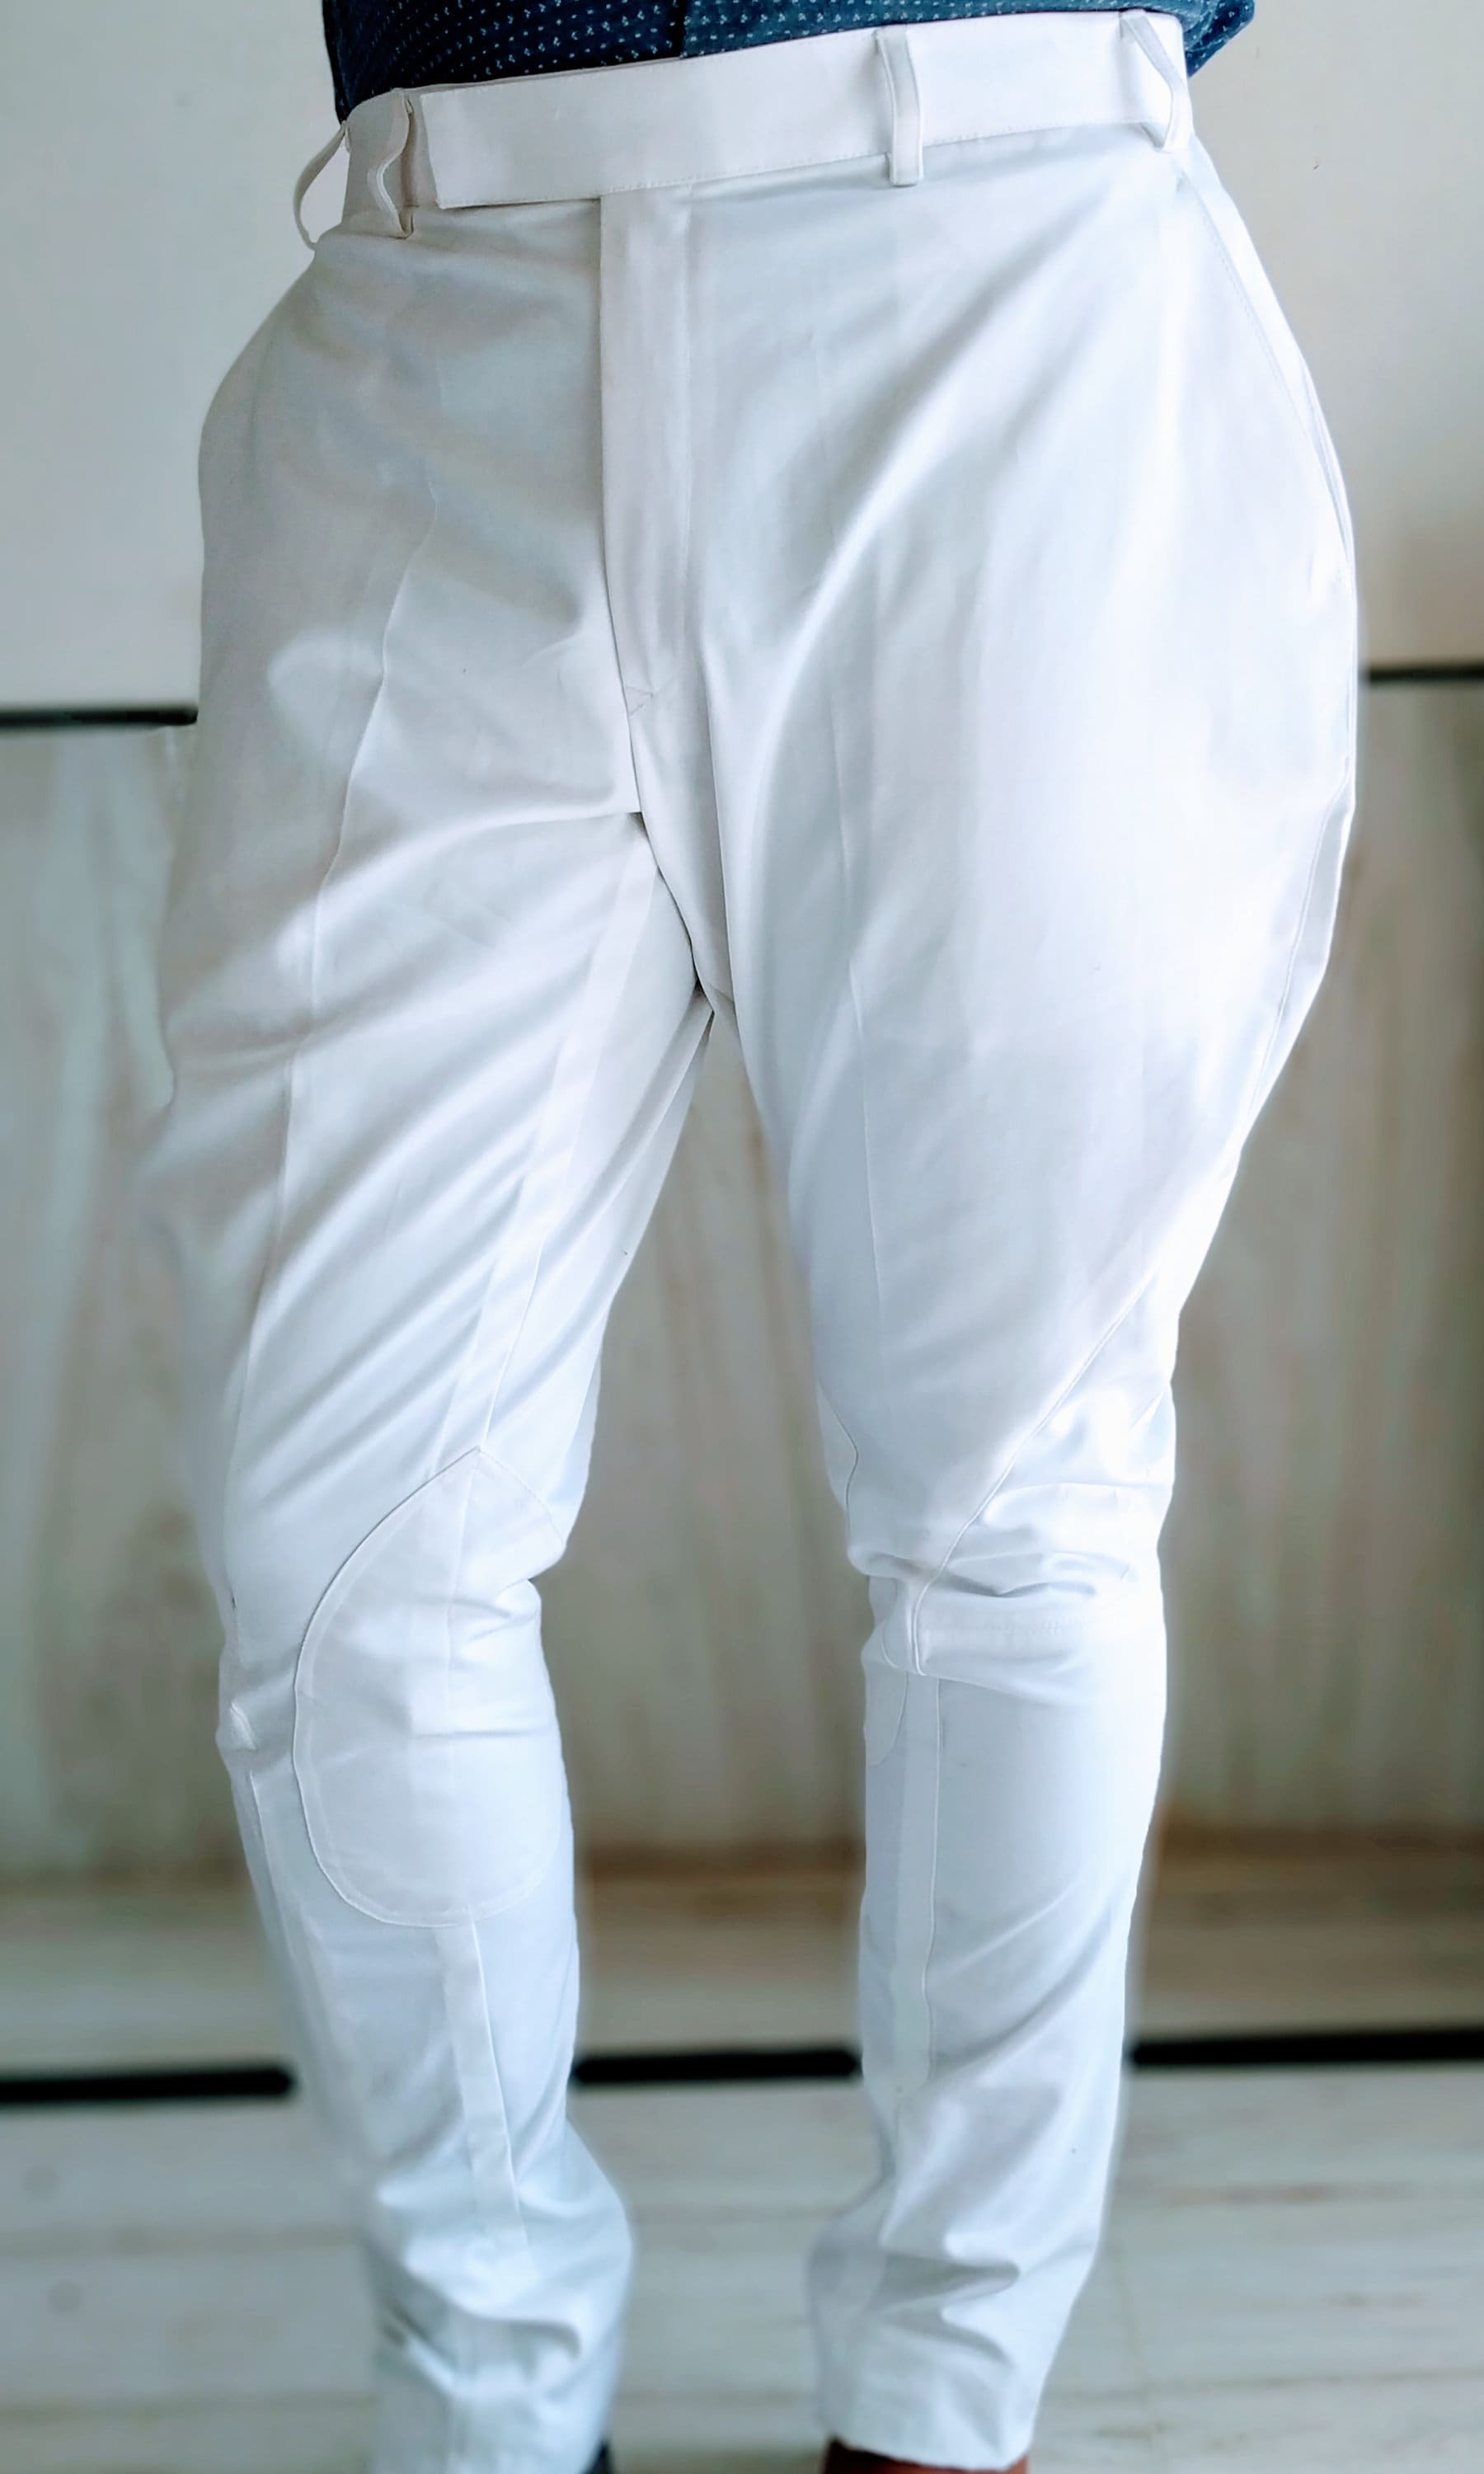 Buy Breakthrough® Jodhpur Breeches with Contrasting KNEEPATCH for Men |  Fashion Wear Balloon Pants, Semi Formal and Casual Trousers (Cream Breeches  with Black Knee Patch-36) at Amazon.in